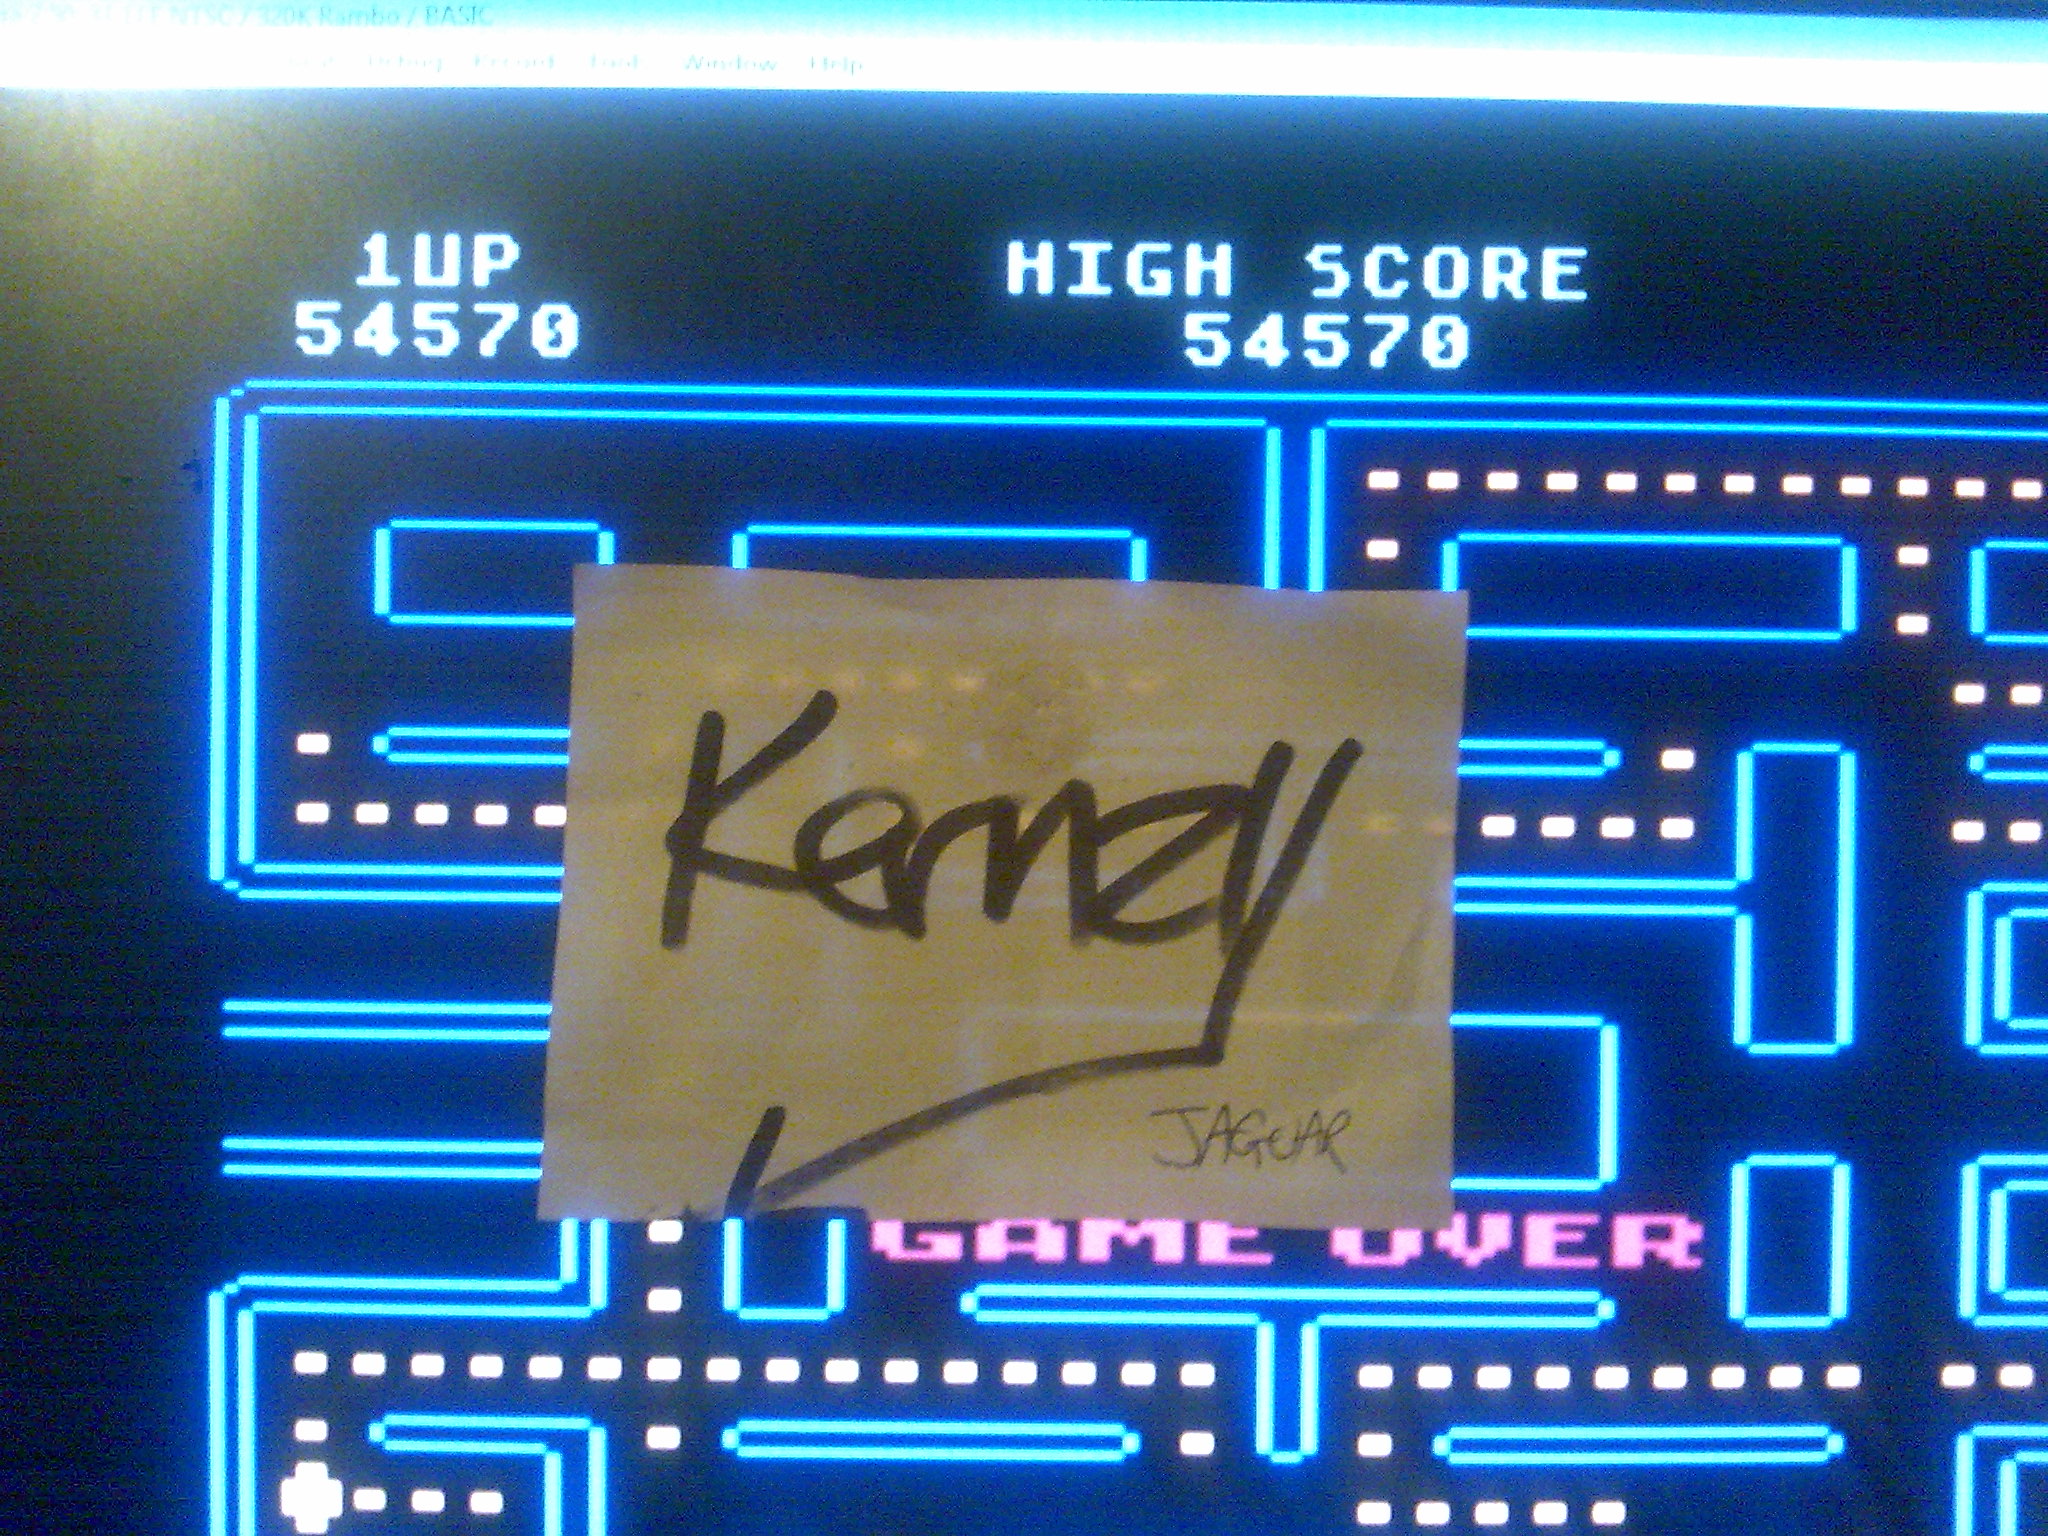 kernzy: Pac-Man [Strawberry Start] (Atari 400/800/XL/XE Emulated) 54,570 points on 2014-10-18 22:23:08